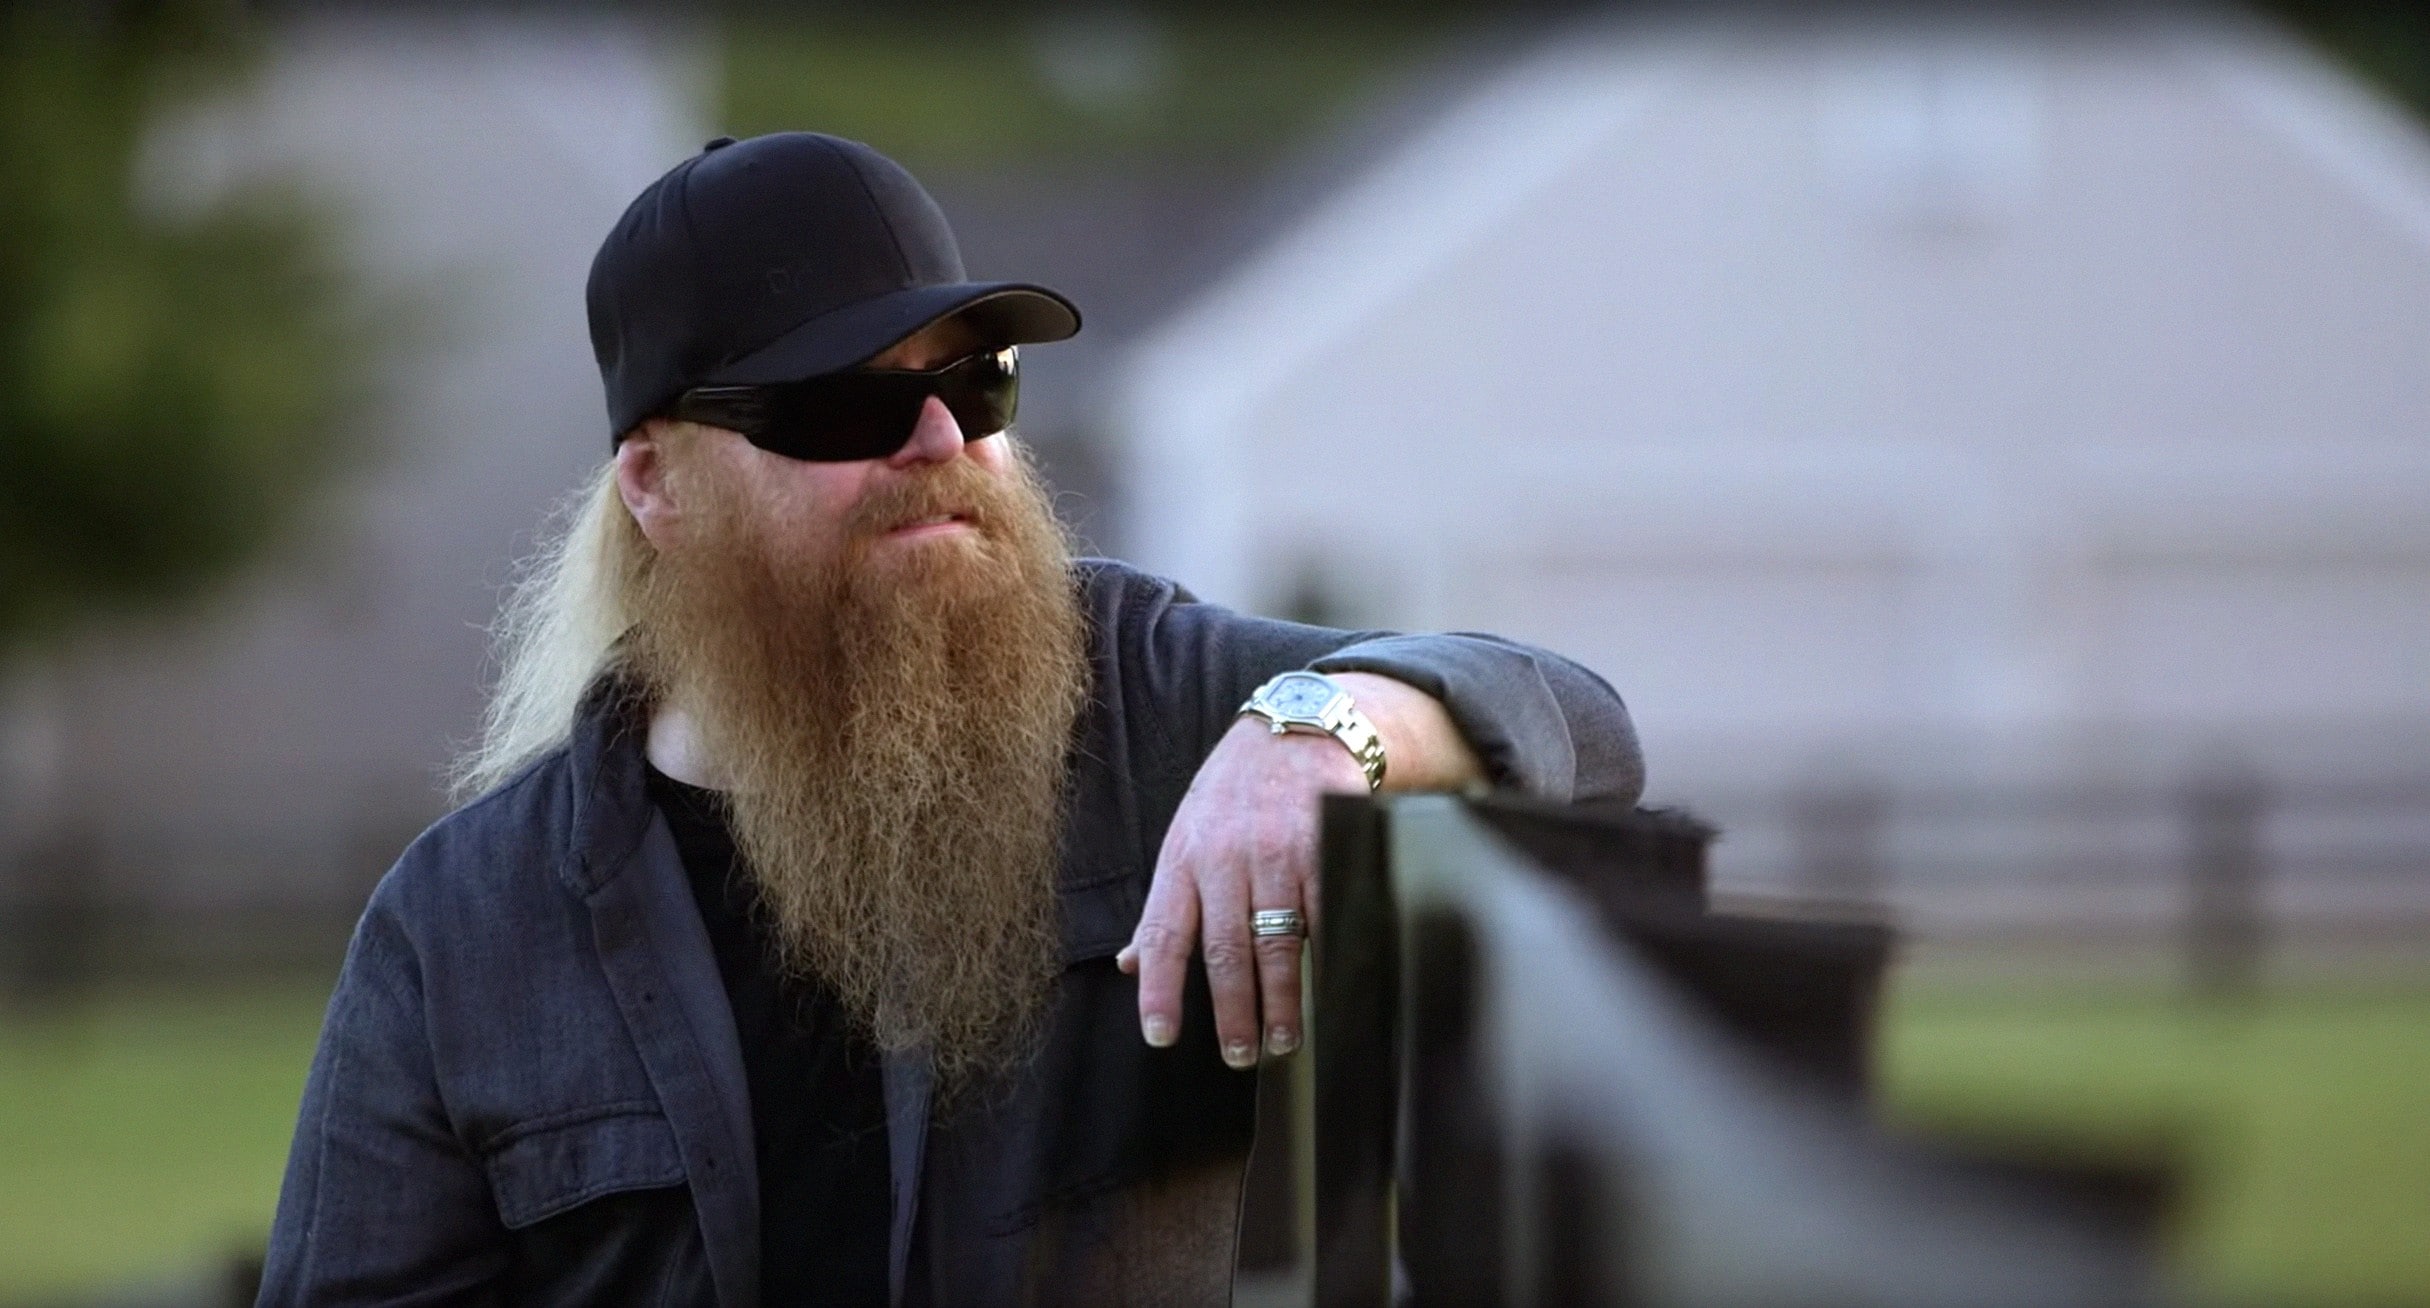 ZZ TOP: THAT LITTLE OL' BAND FROM TEXAS, Dusty Hill, 2019